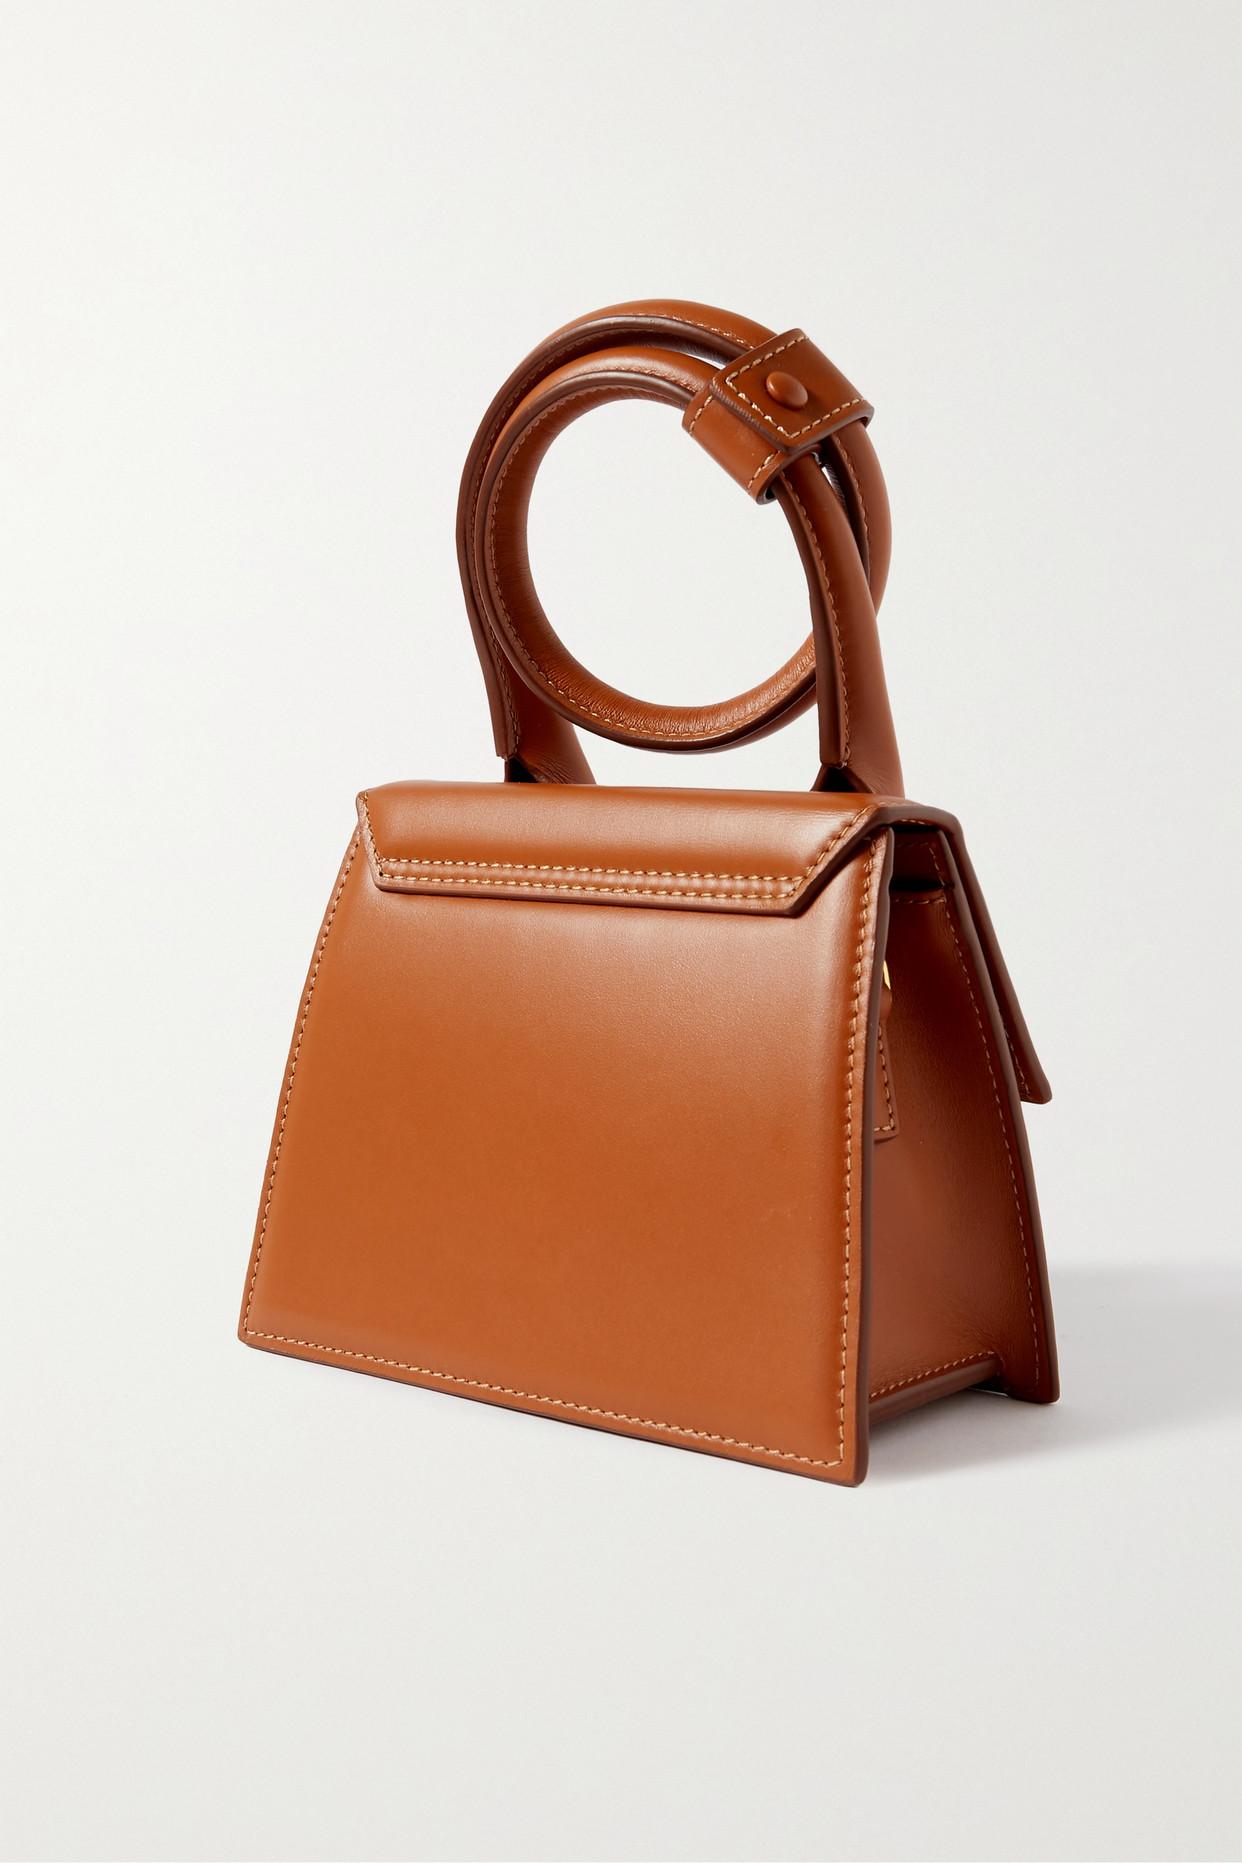 Jacquemus Le Chiquito Noeud Leather Shoulder Bag in Brown | Lyst